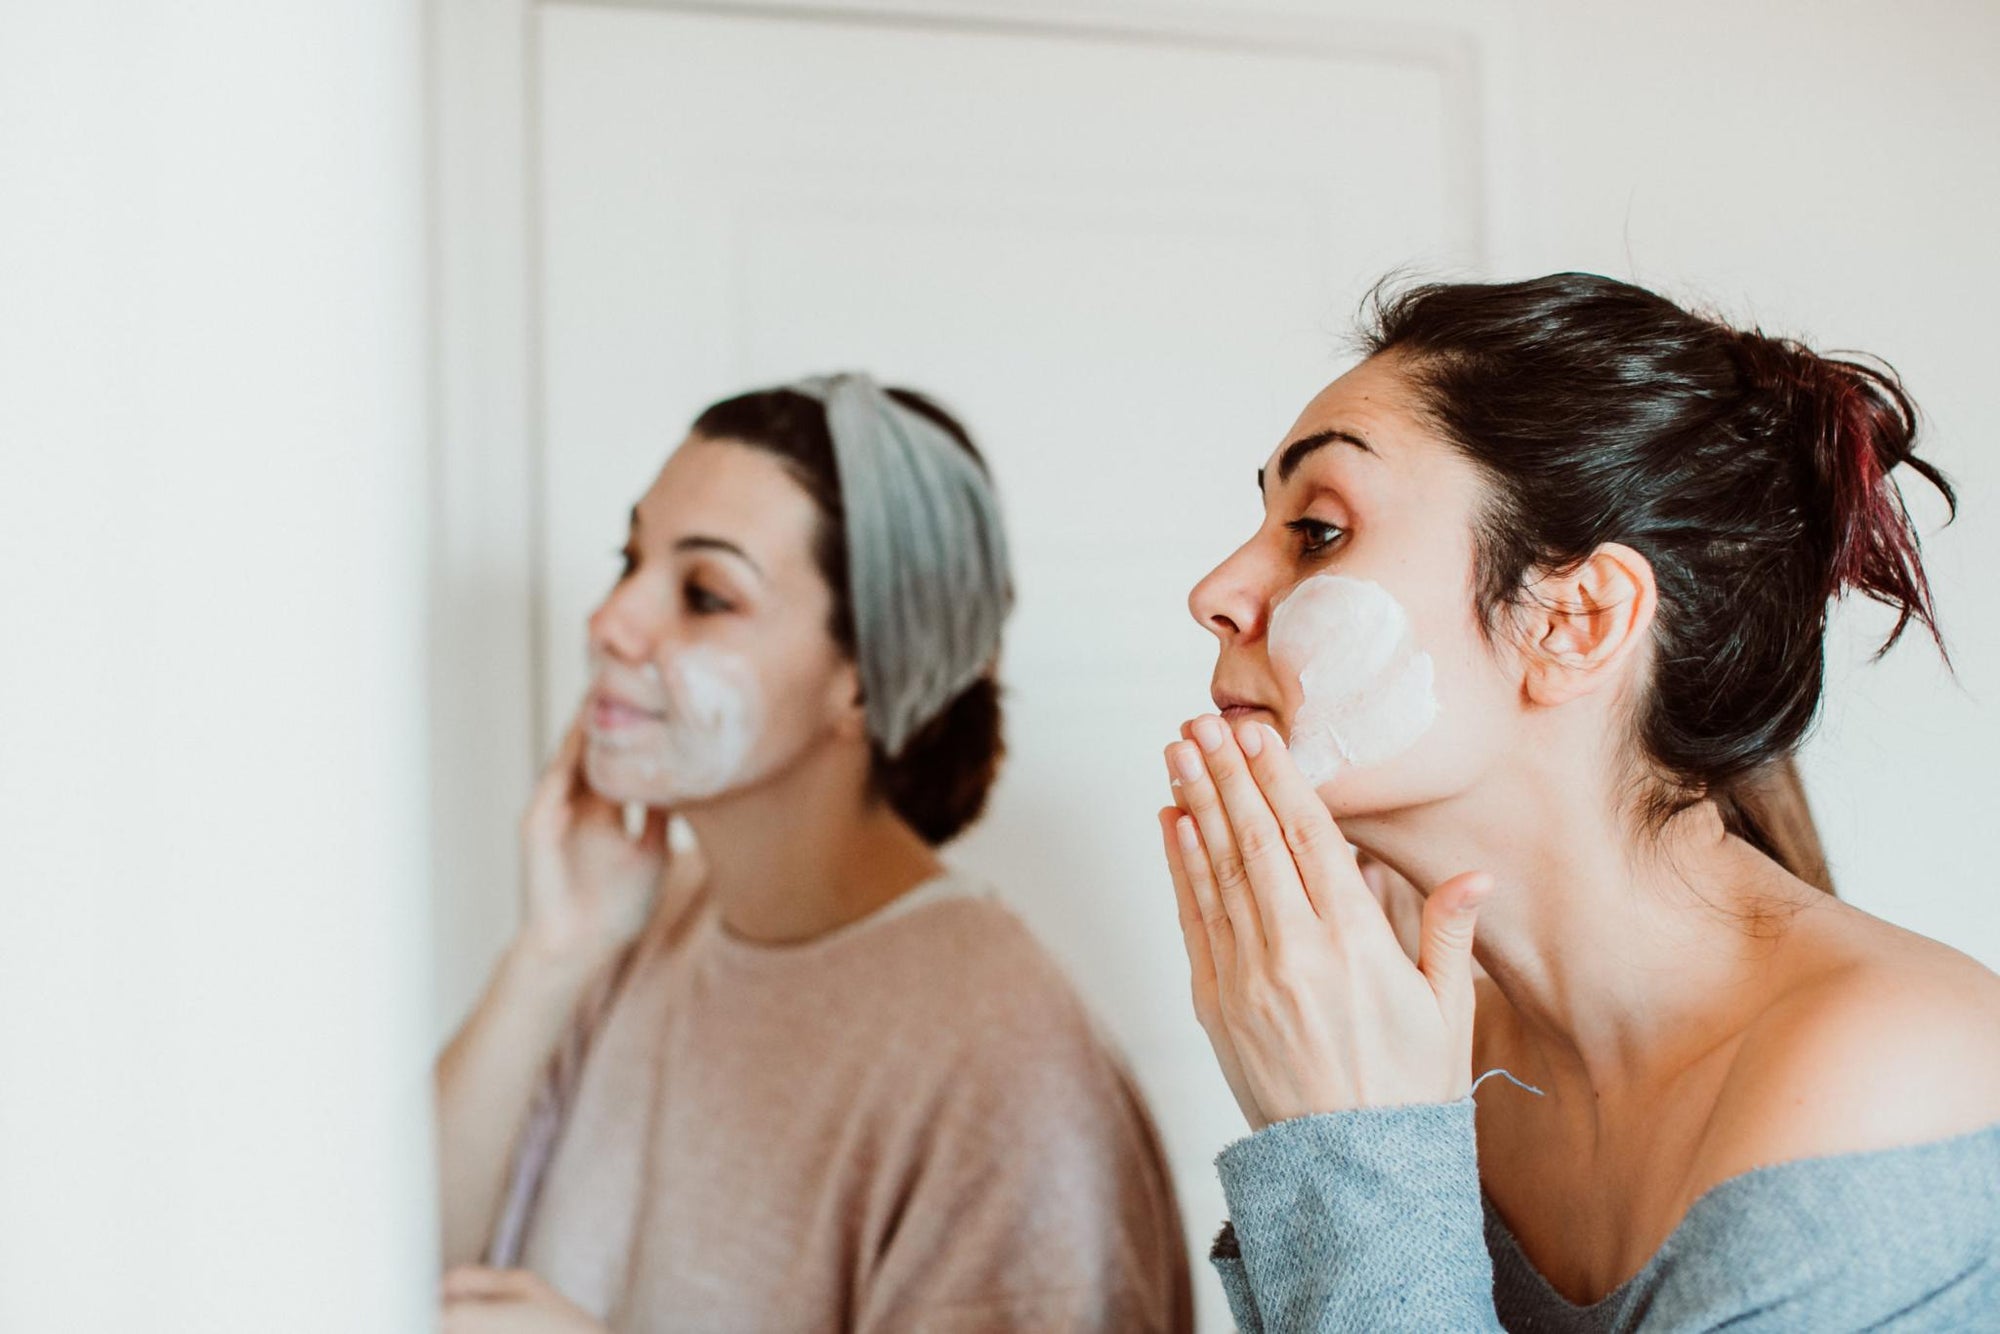 A Simple 3-Step Morning Skincare Routine. Done in 5 minutes!